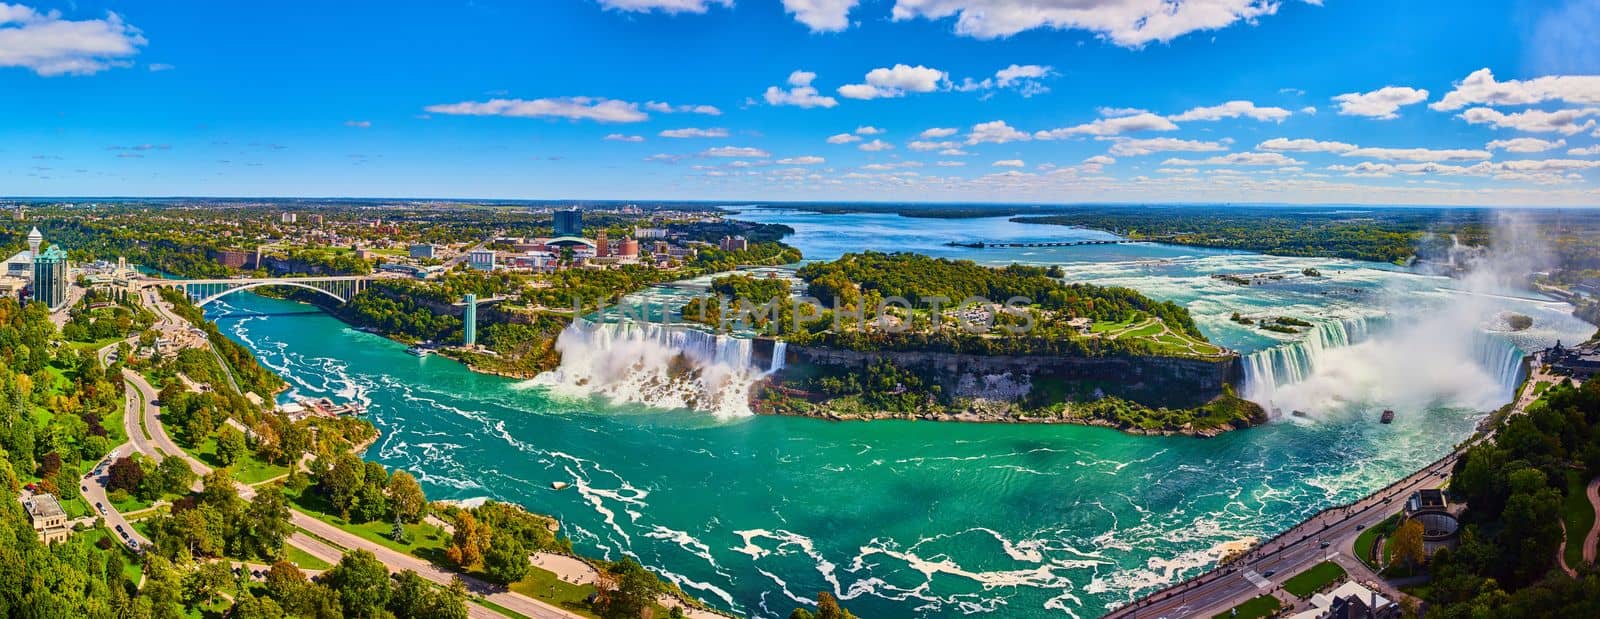 Wide panorama overlook of entire Niagara Falls from Canada by njproductions